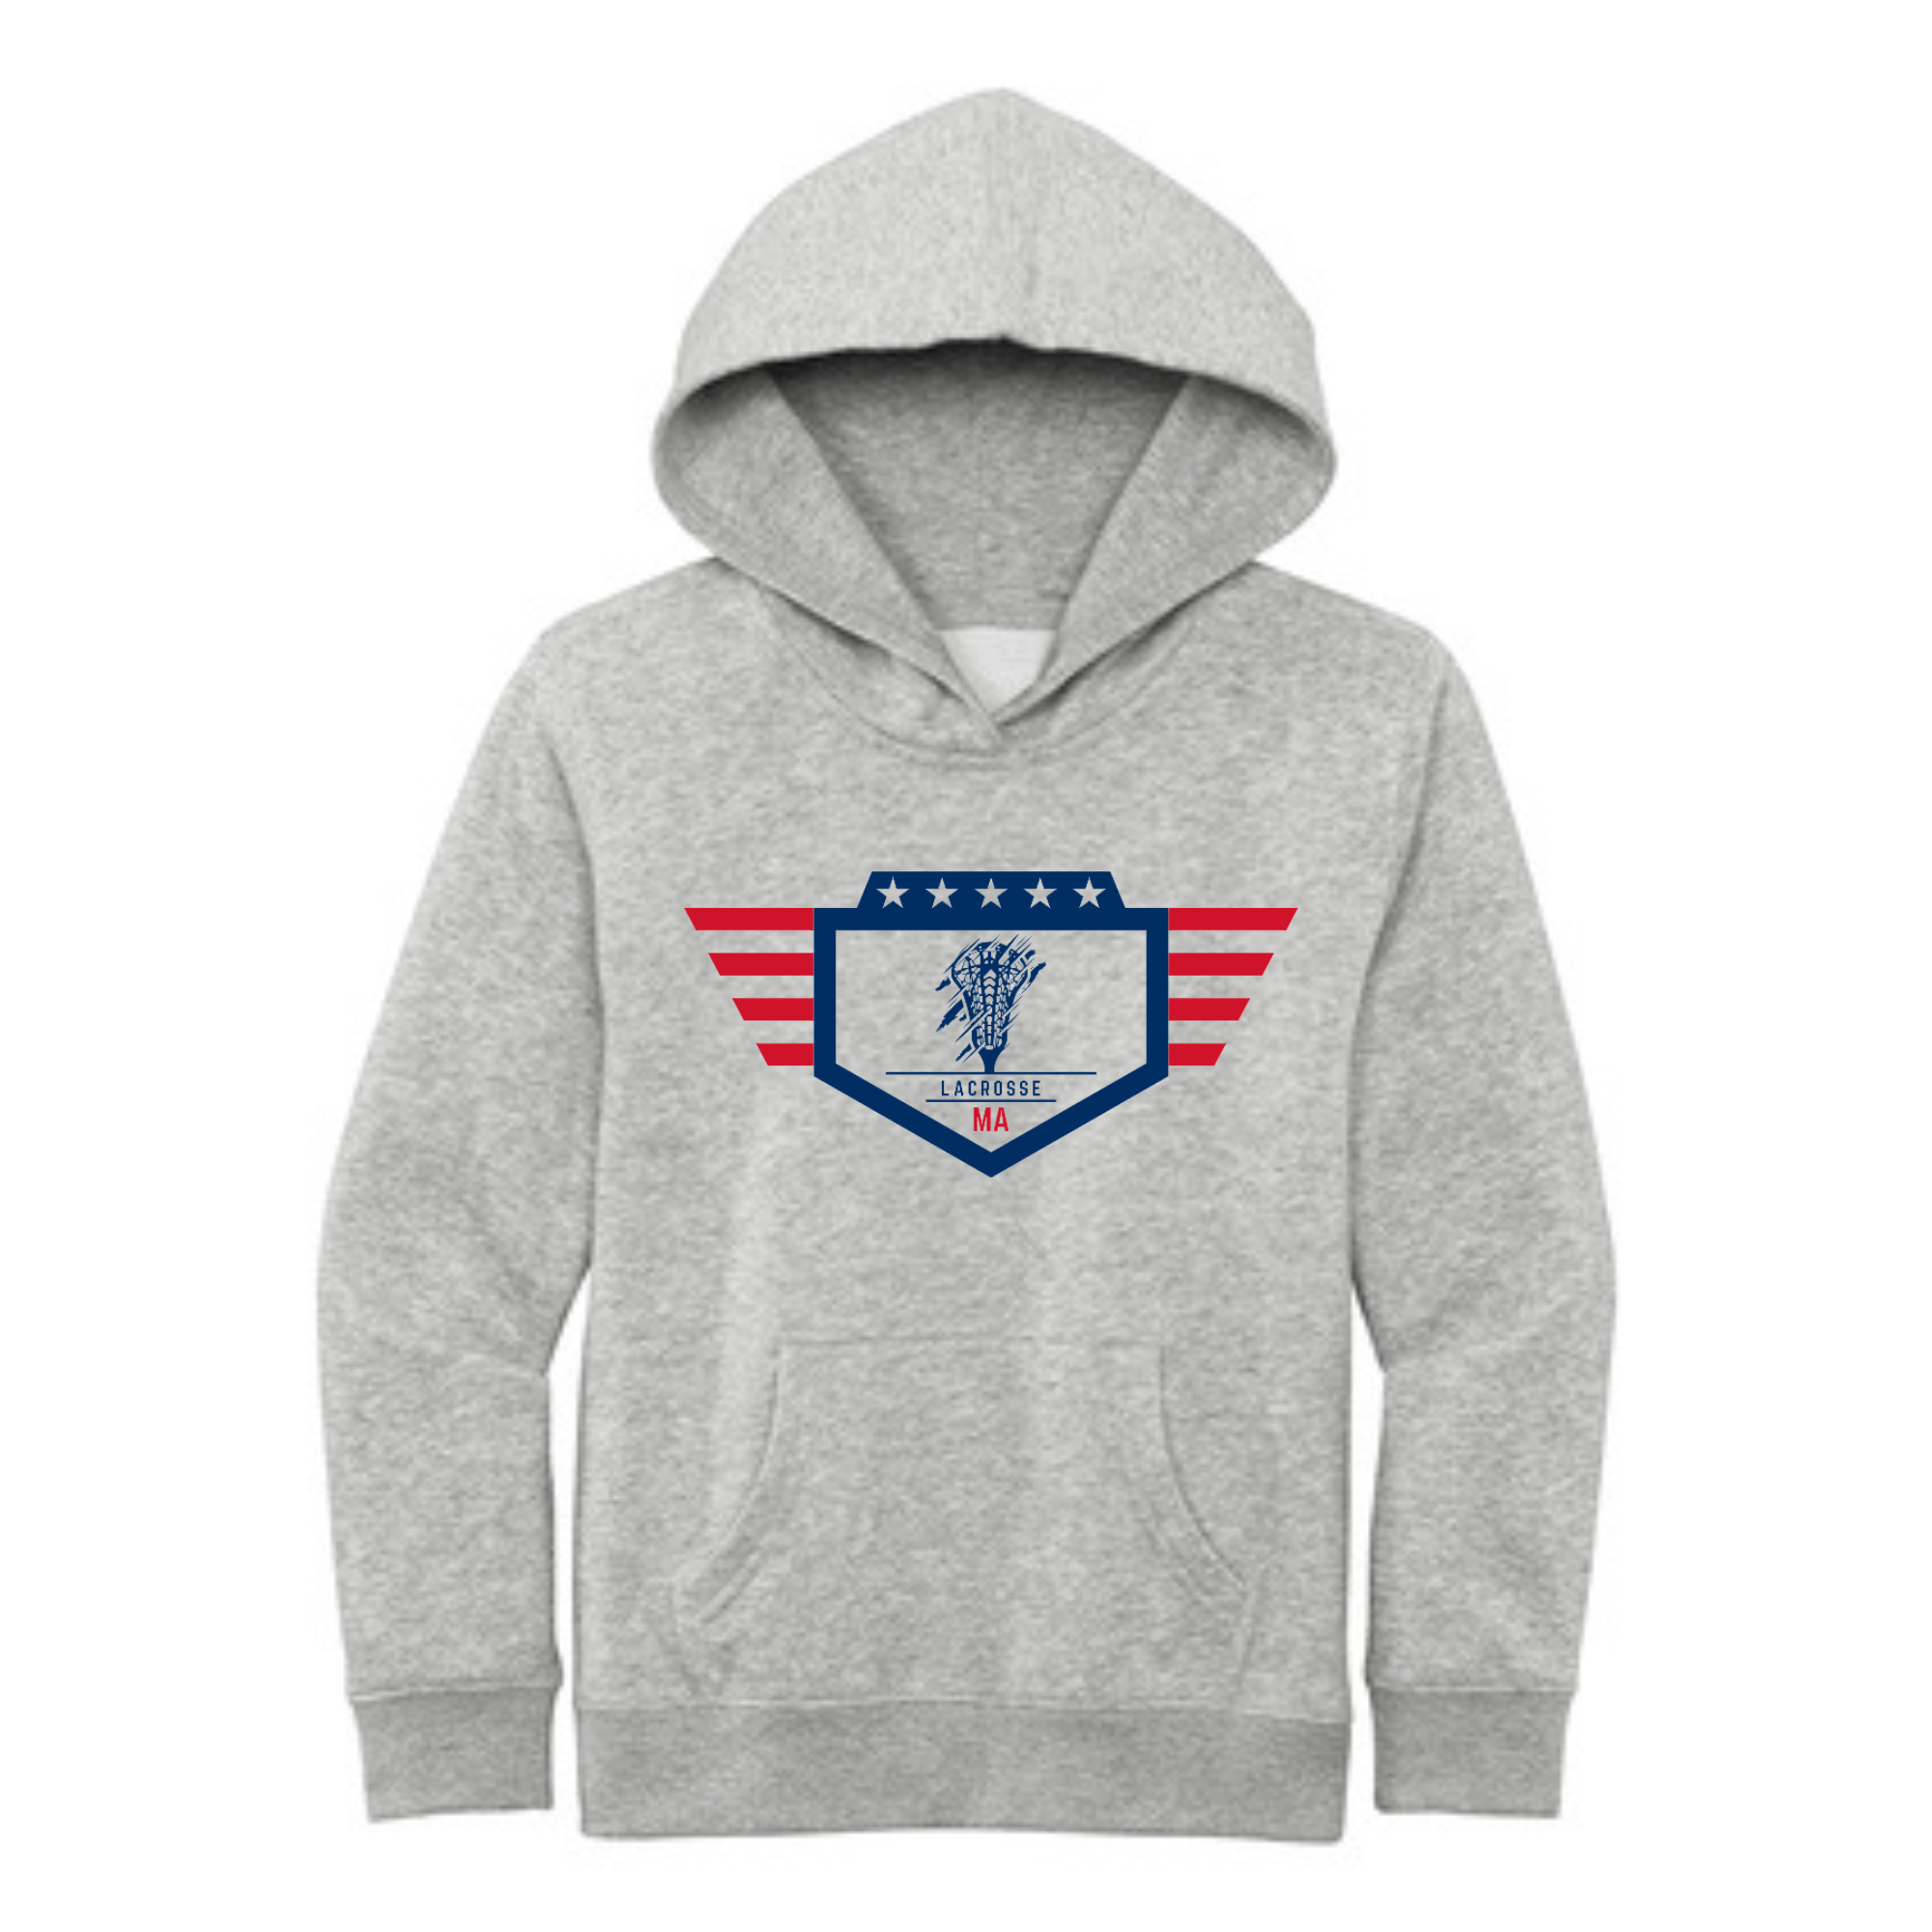 TUNEUP TOURNAMENT MA LACROSSE YOUTH HOODIE - GRAY